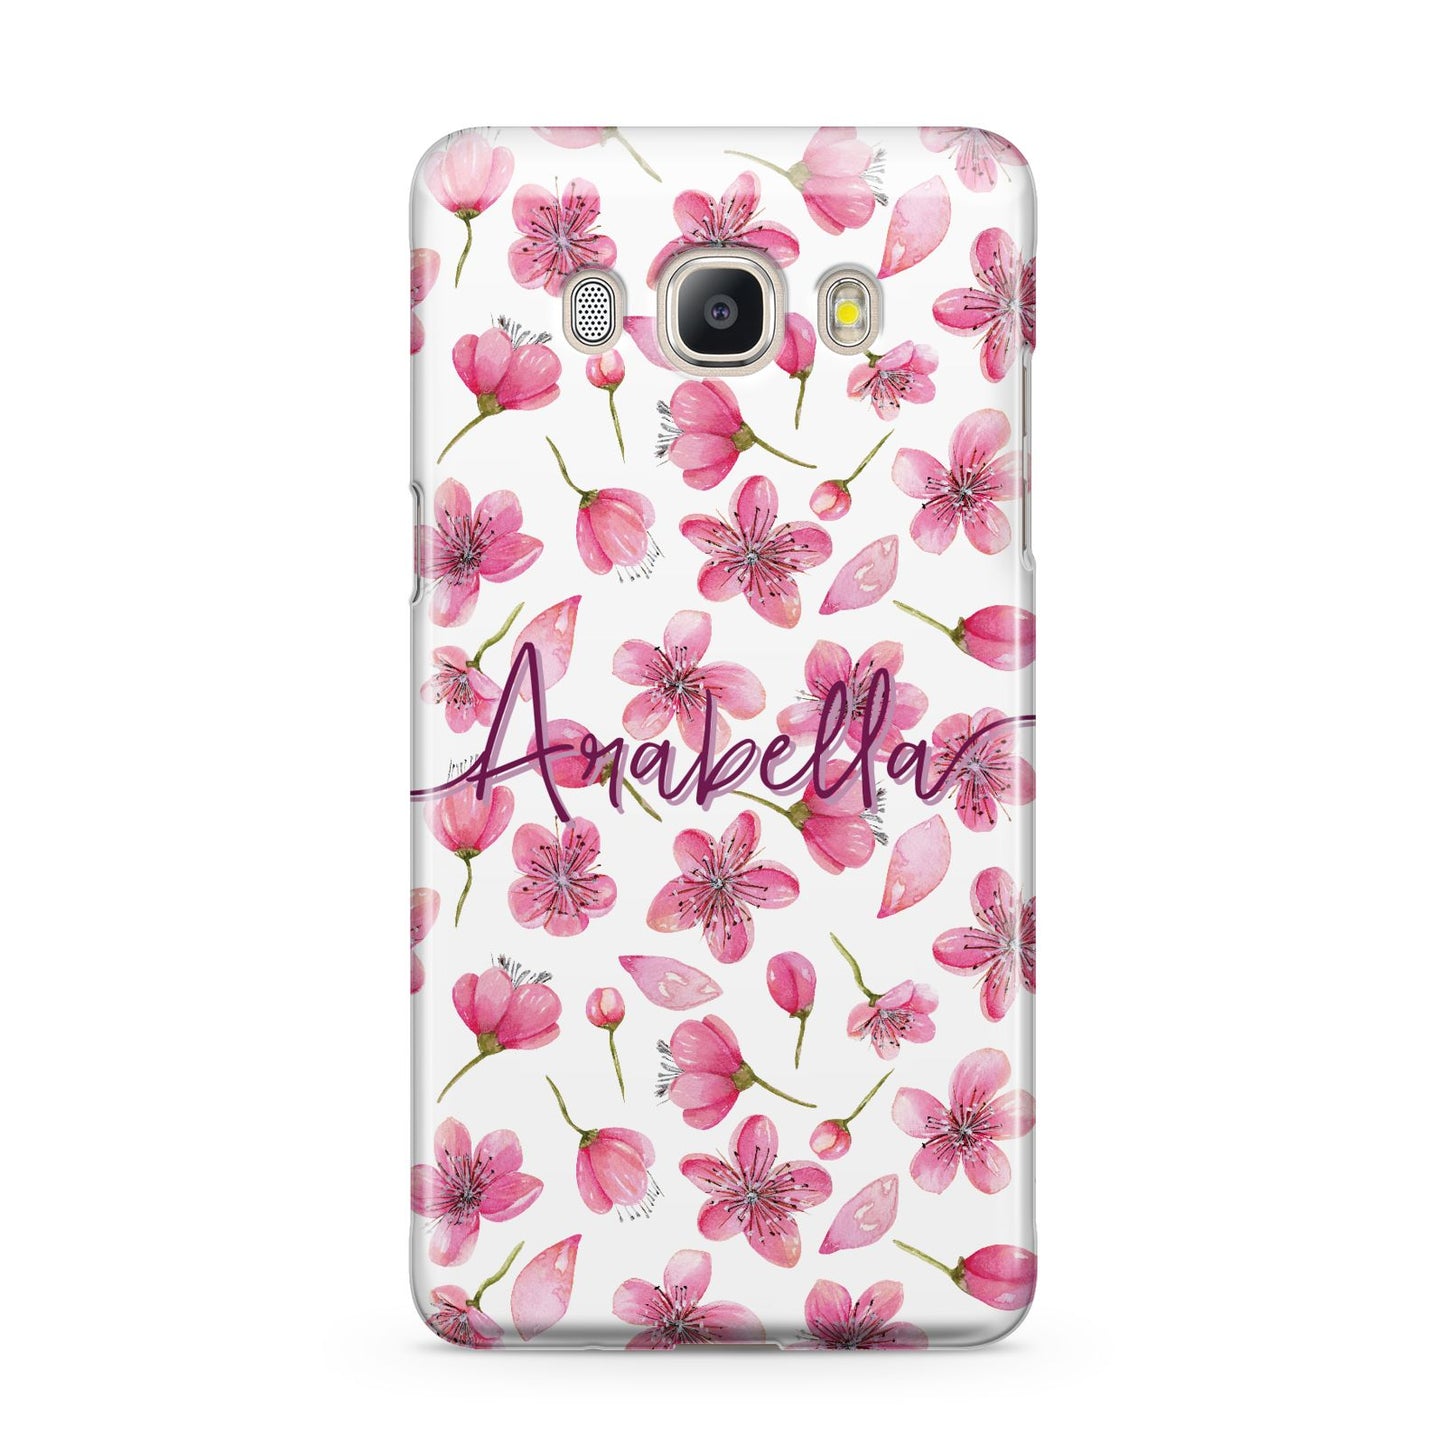 Personalised Blossom Pattern Pink Samsung Galaxy J5 2016 Case